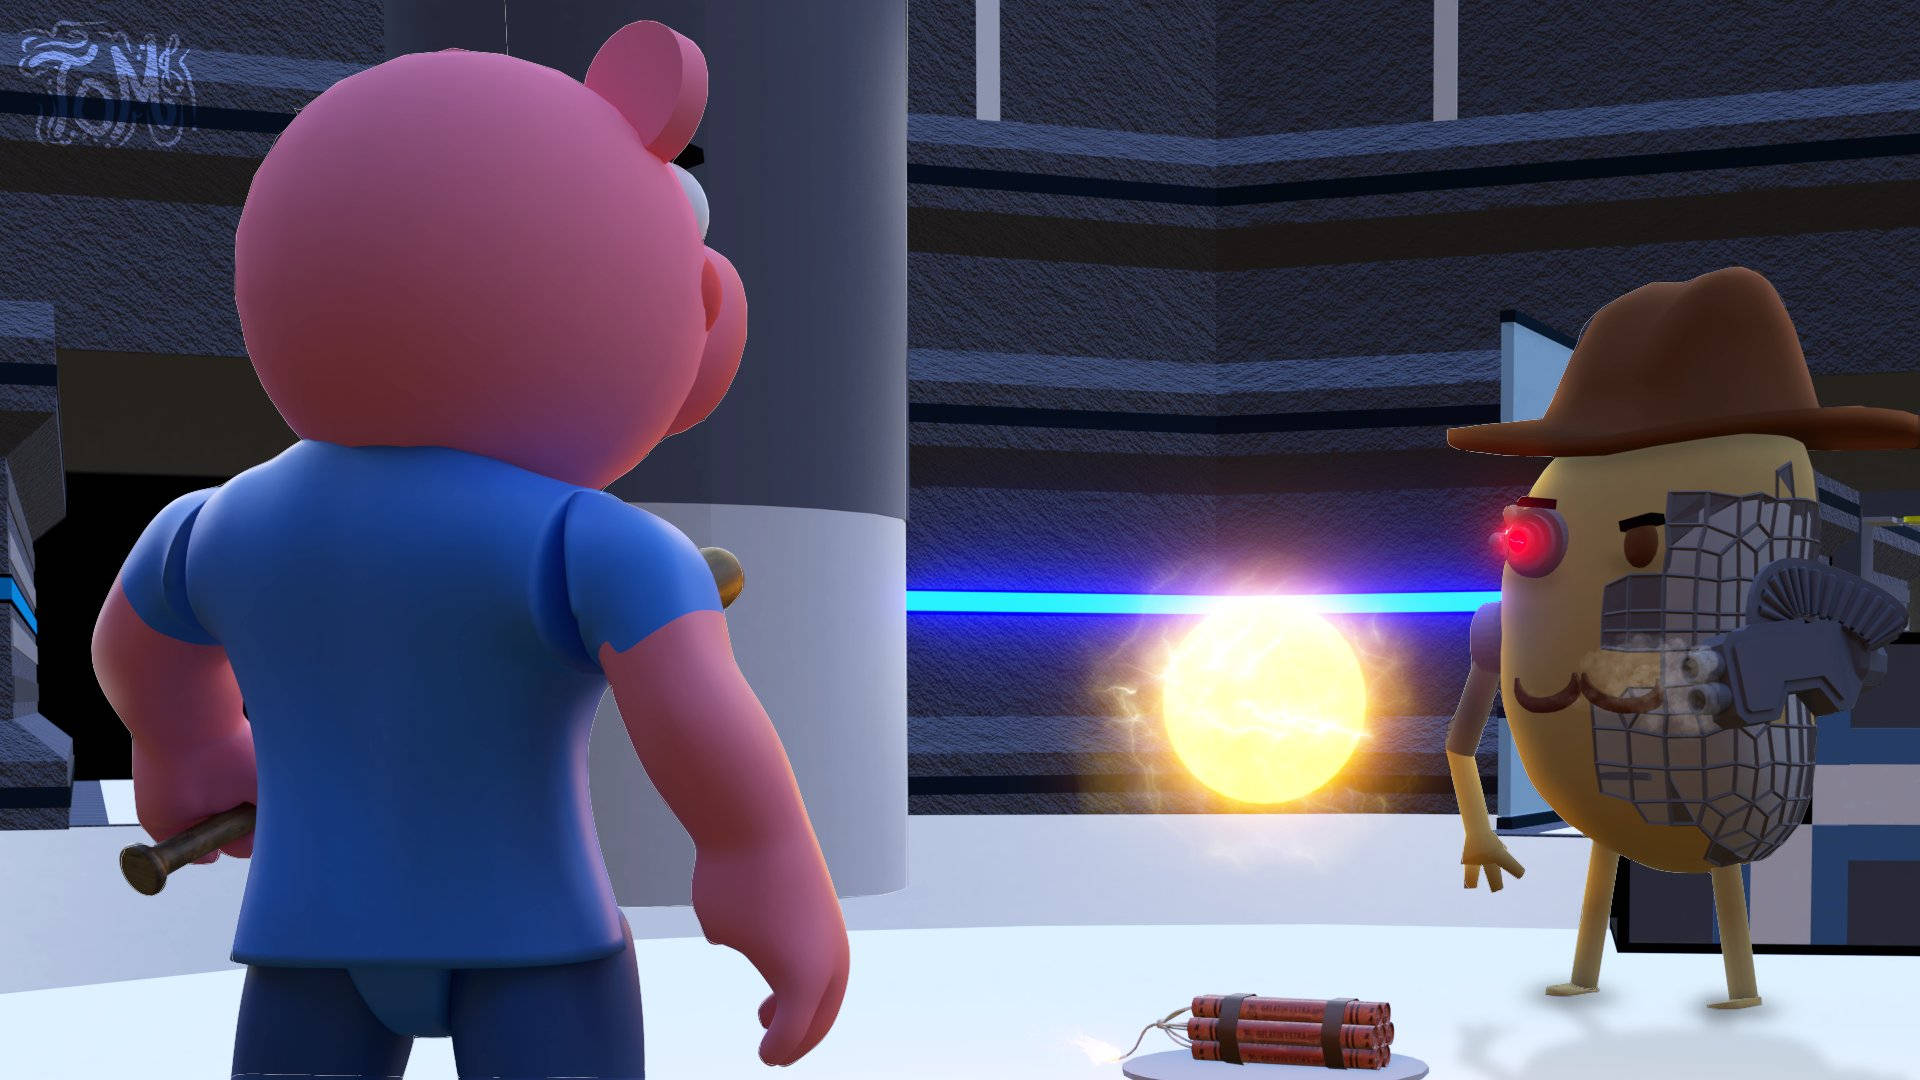 "Outwit the guards and solve the puzzles in Roblox Piggy!" Wallpaper